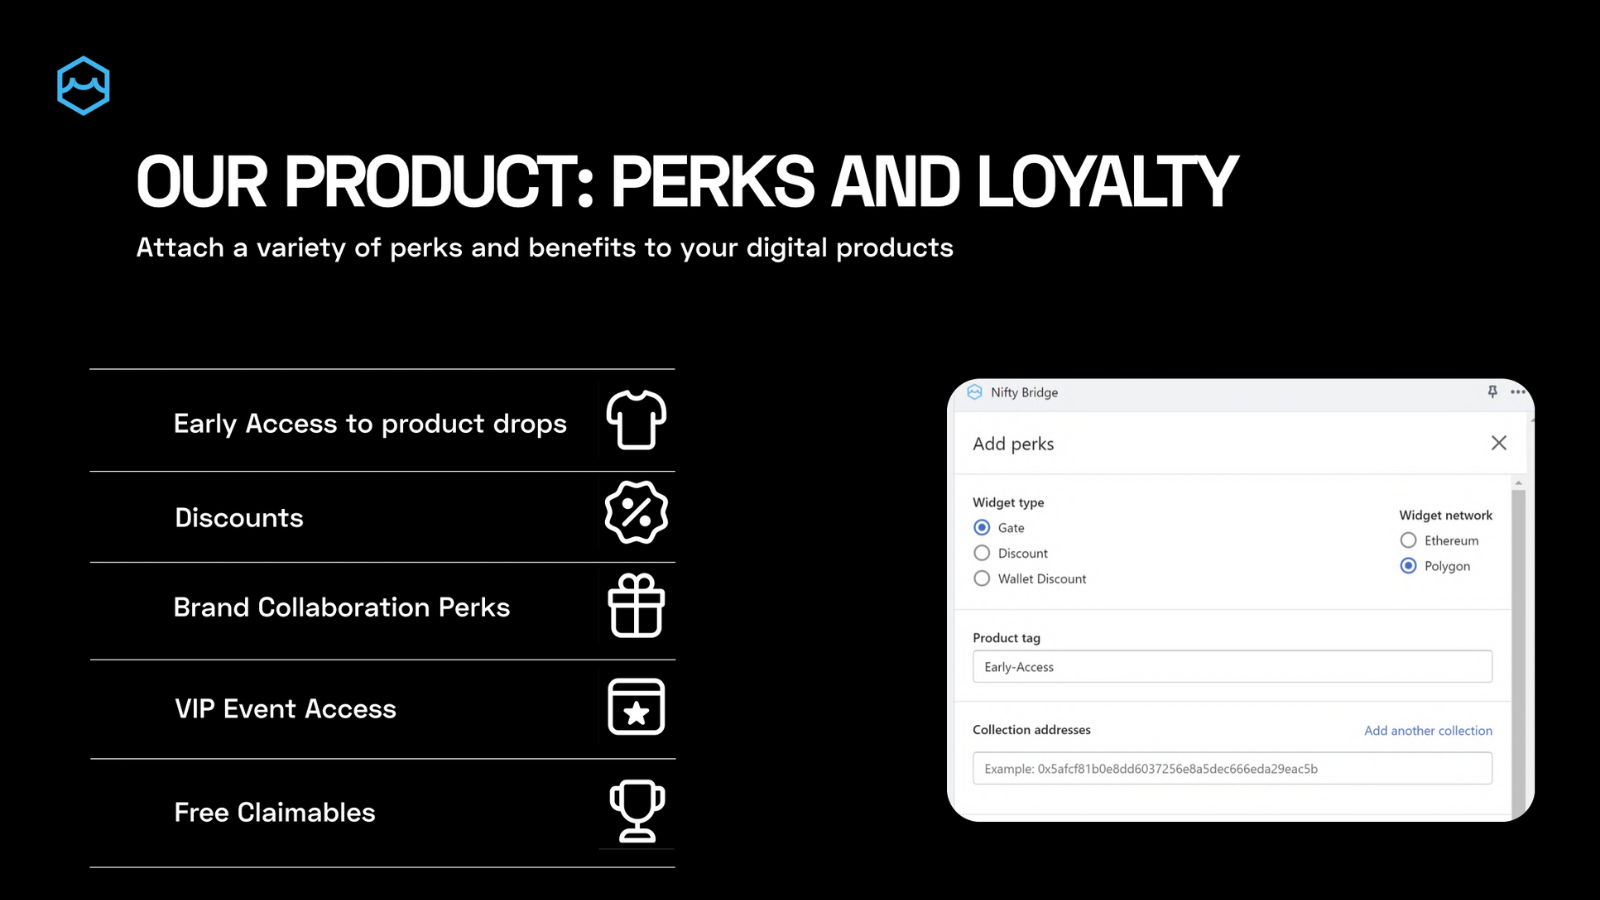 Attach a variety of exclusive perks to your digital products